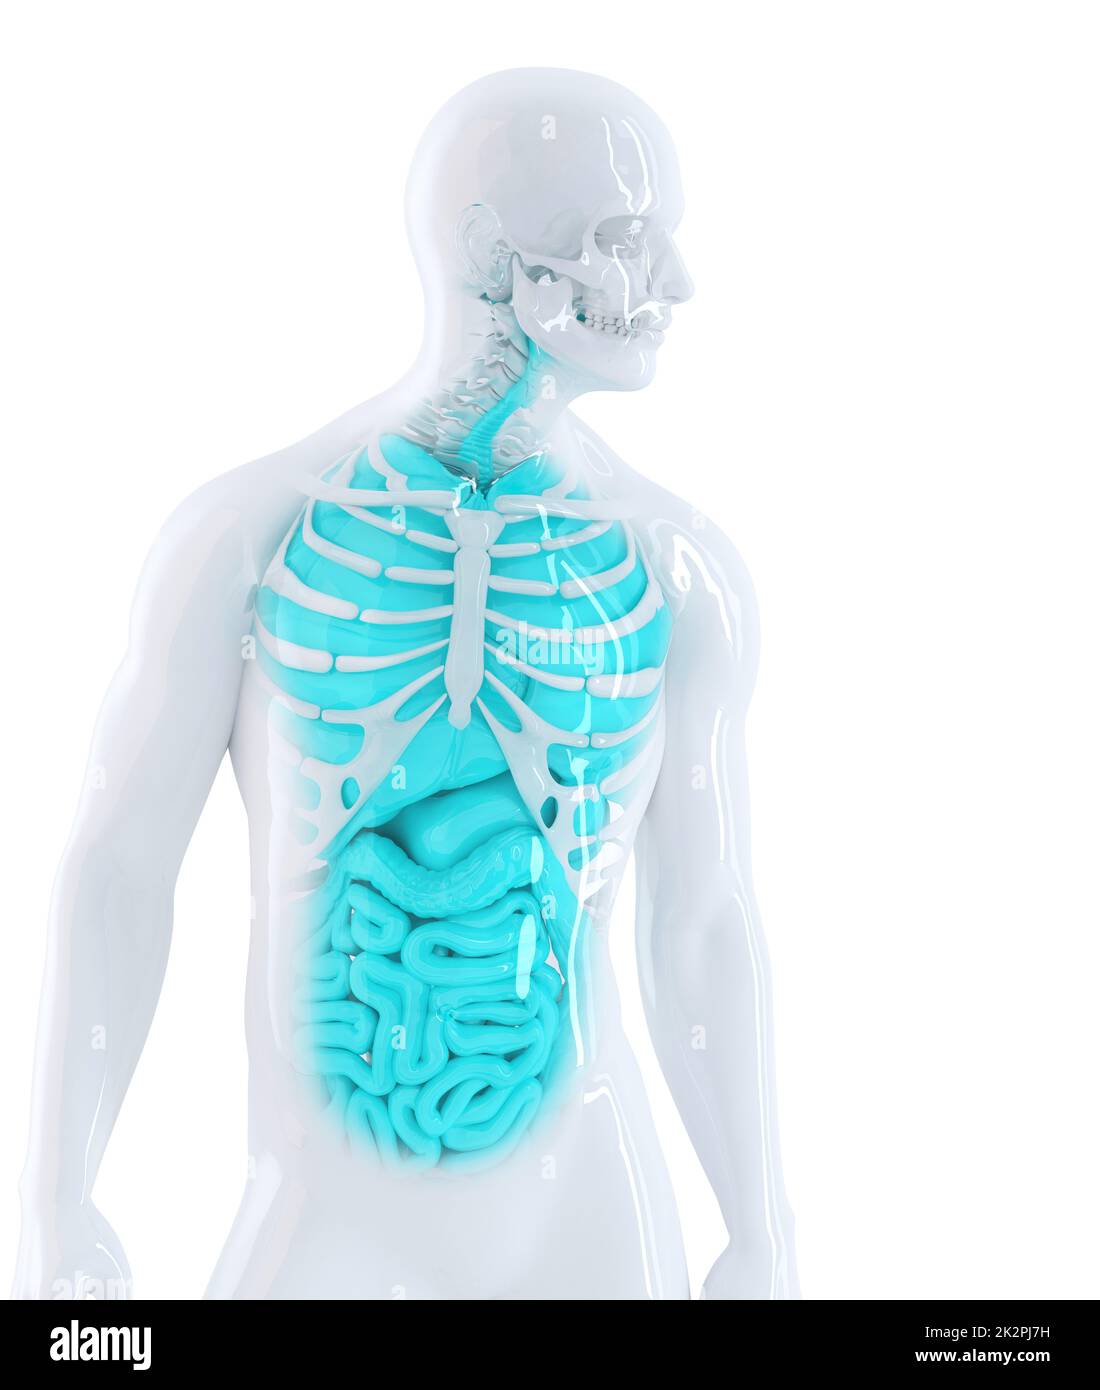 3d illustration of a human internal organs. Isolated. Contains clipping path Stock Photo